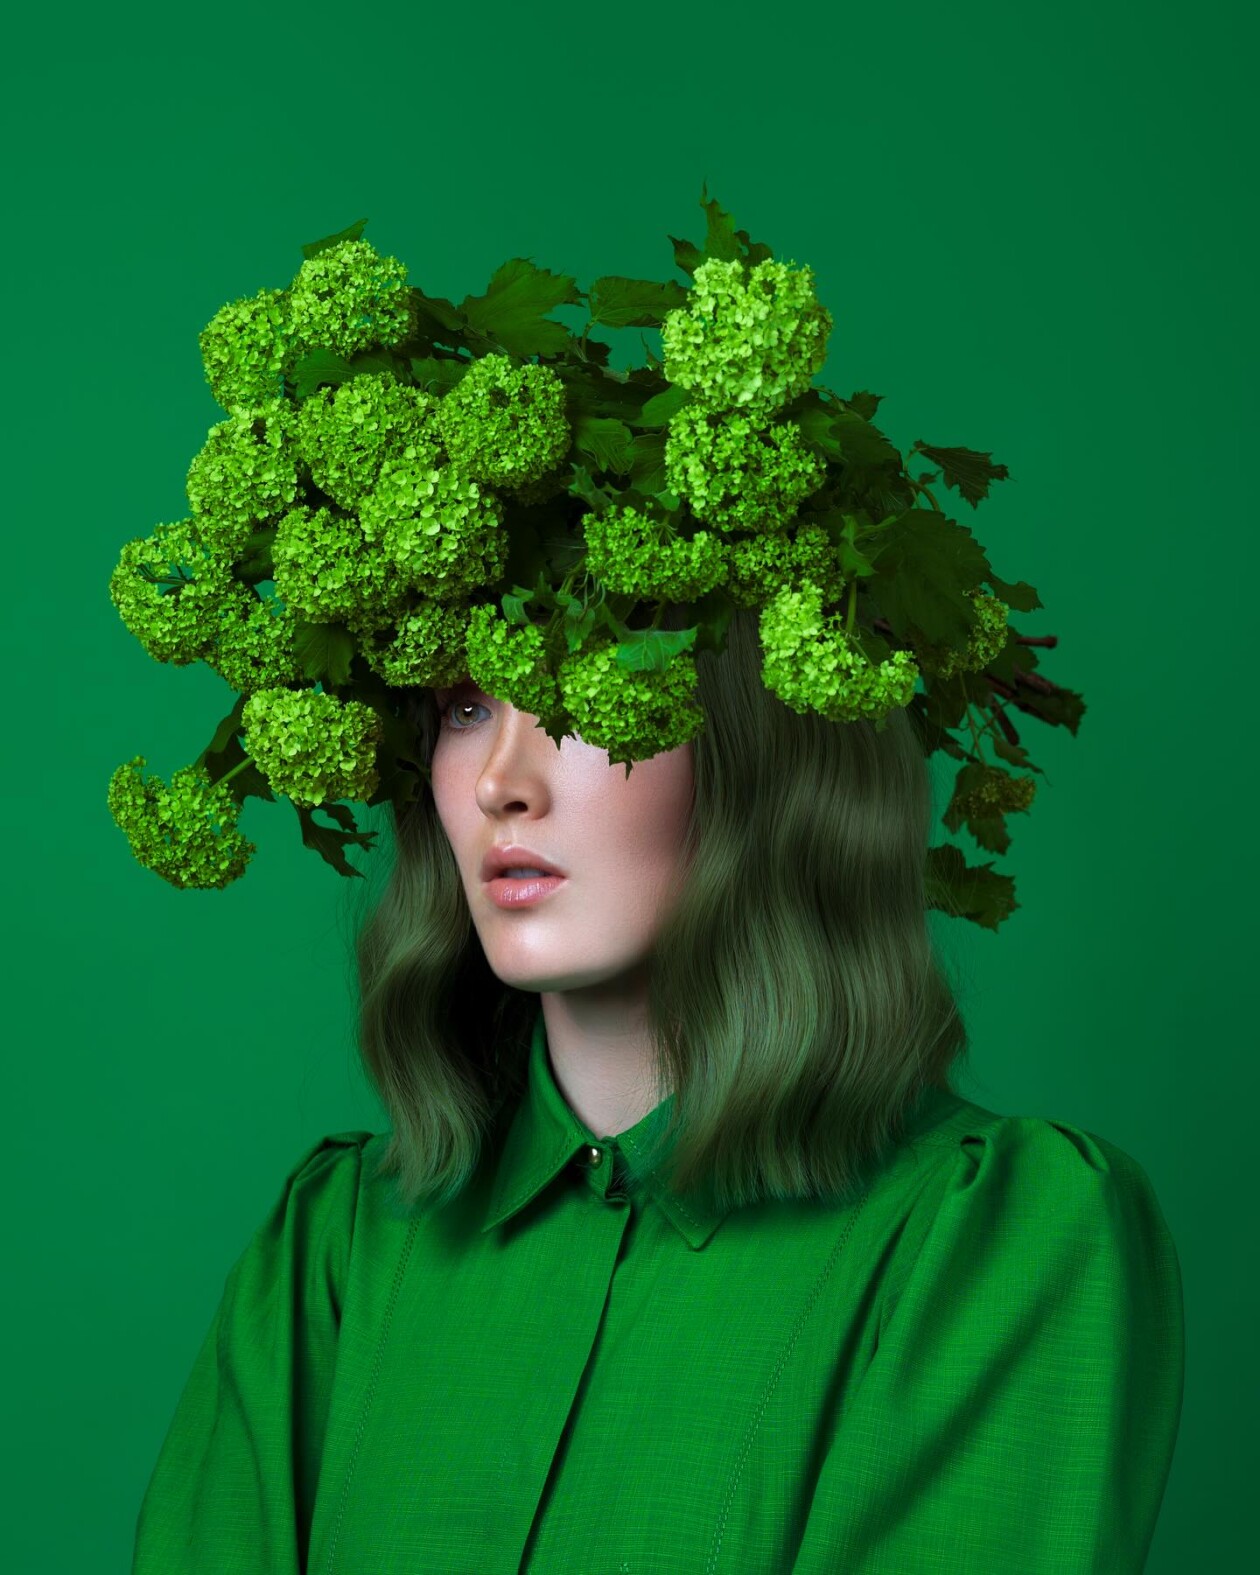 The Lushly Surreal Self Portraits Of Claire Luxton (19)